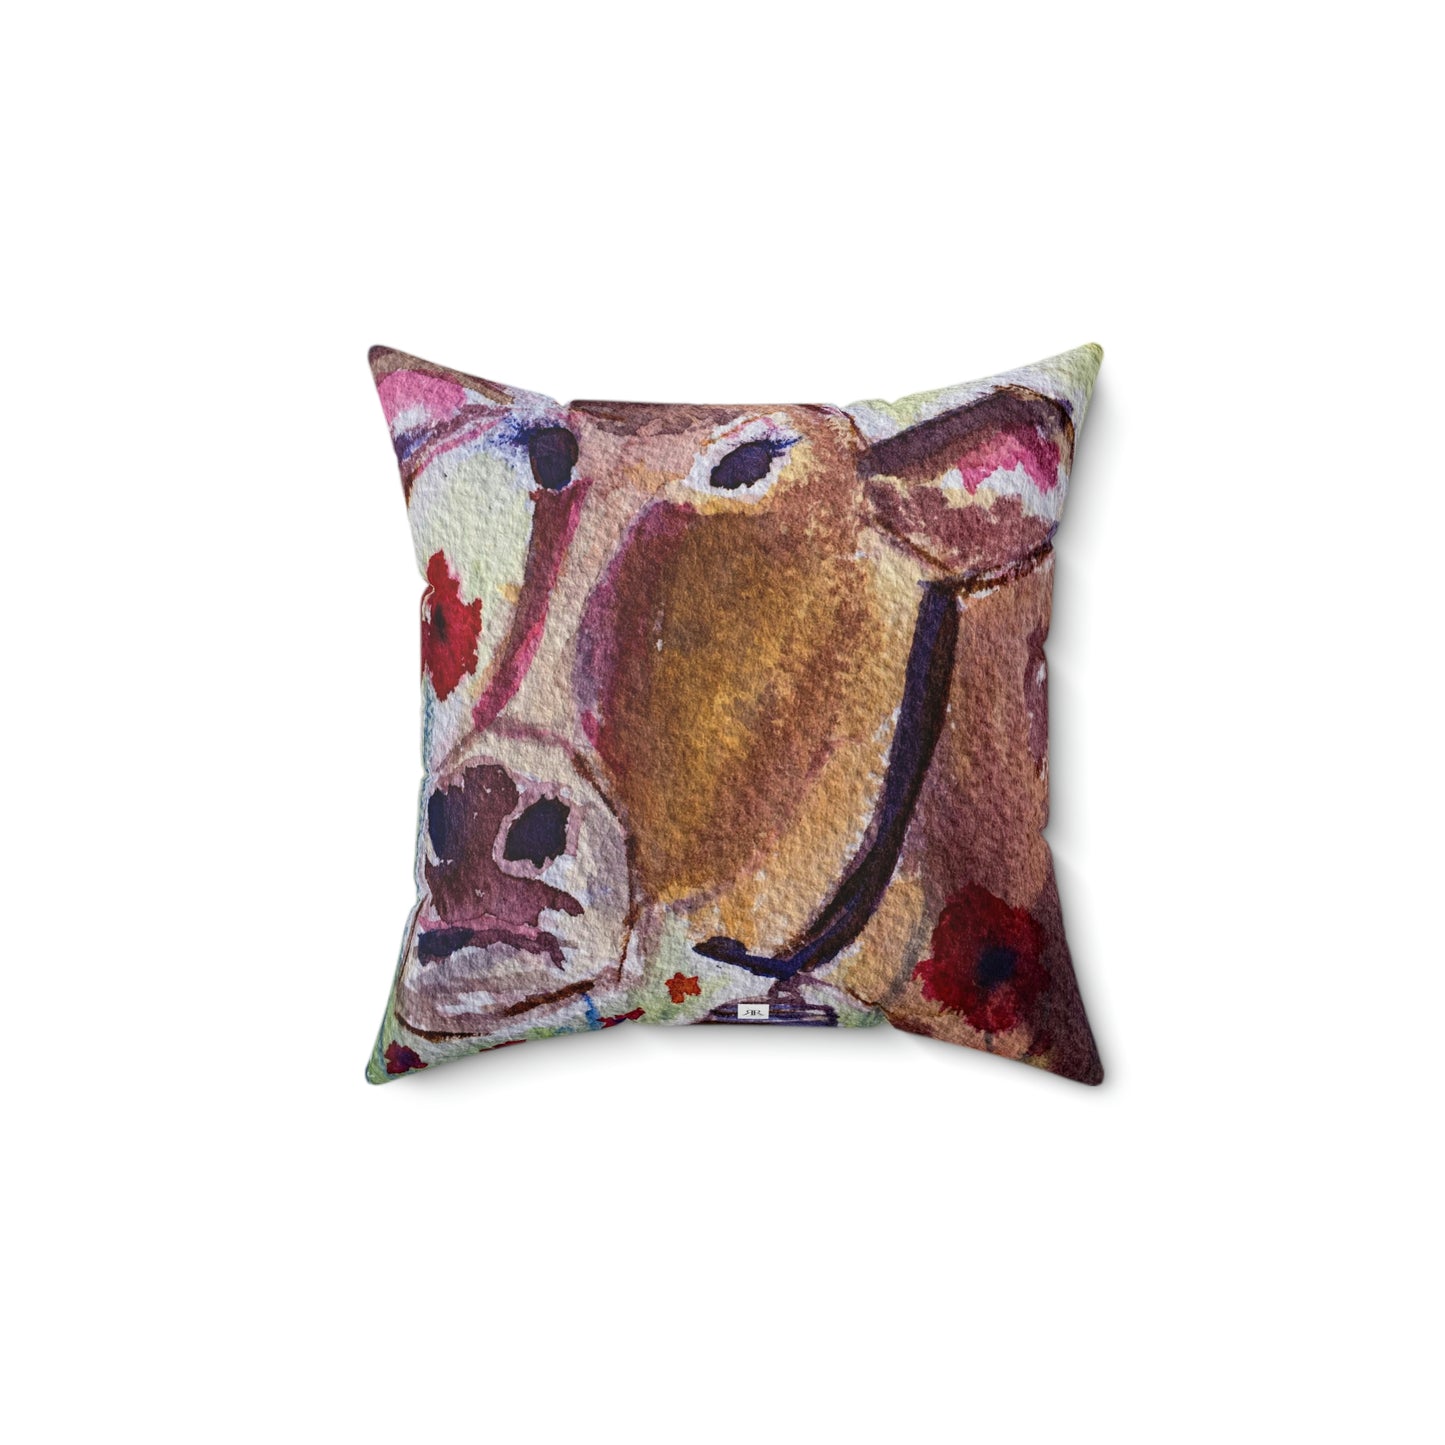 Belle Cow Indoor Spun Polyester Square Pillow